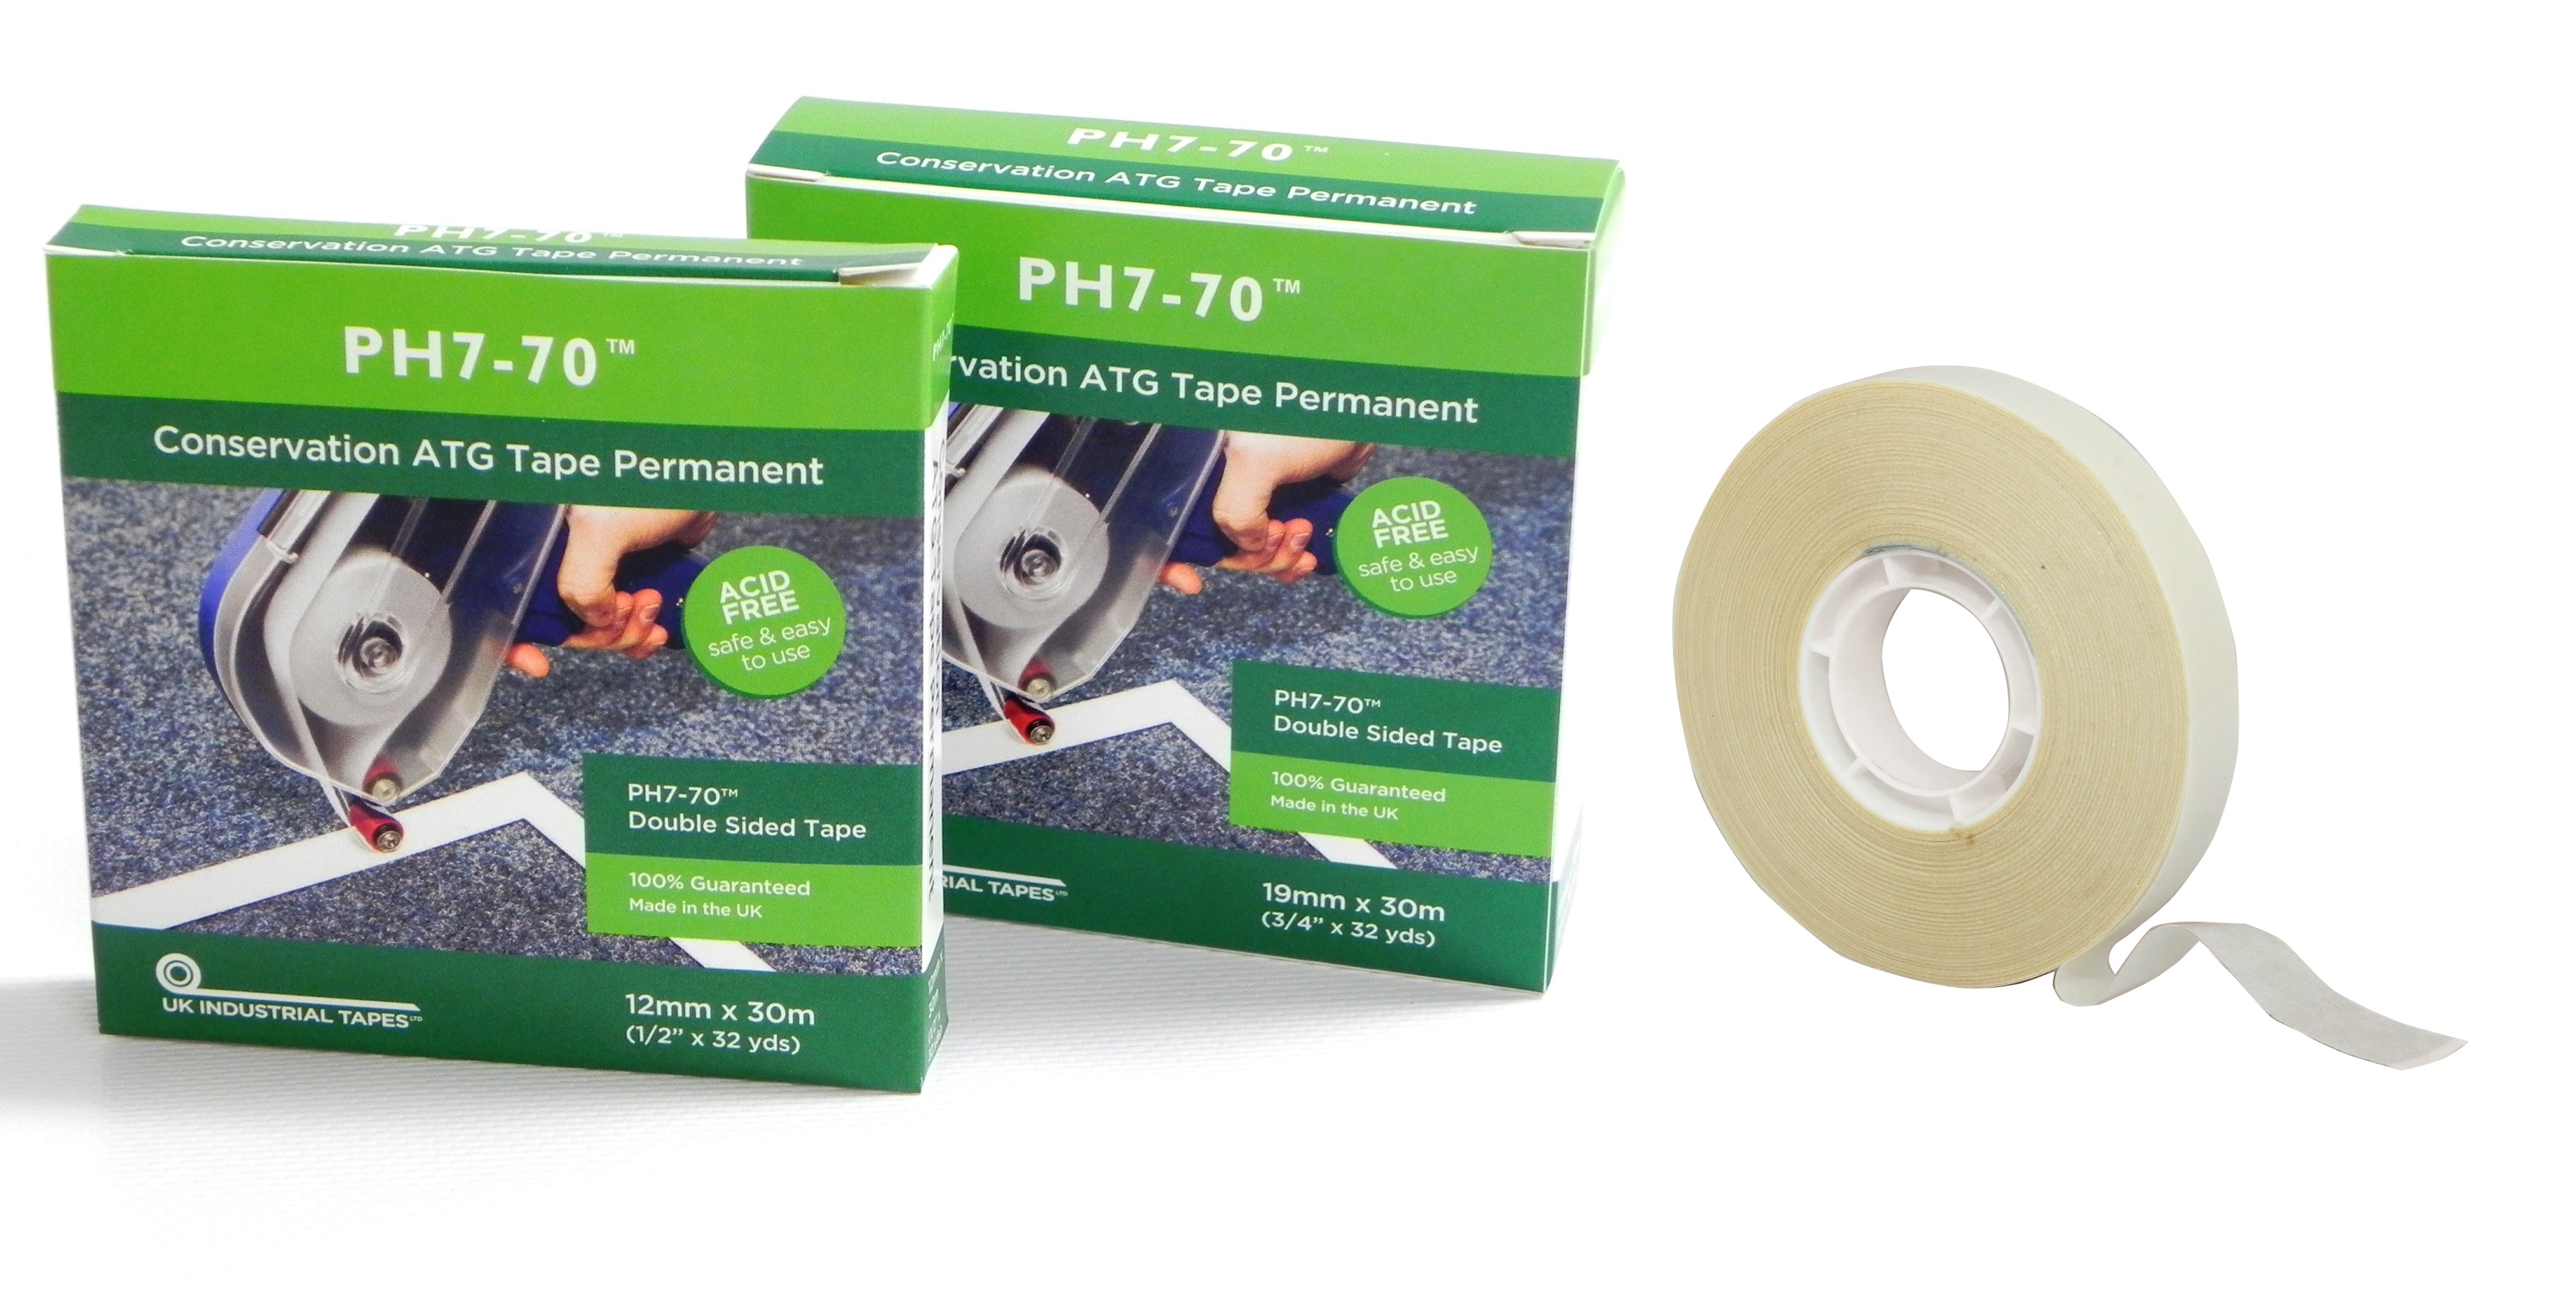 Mounting & Hinging Tapes for Pictures, Photos & Artwork, ph7-70 tape